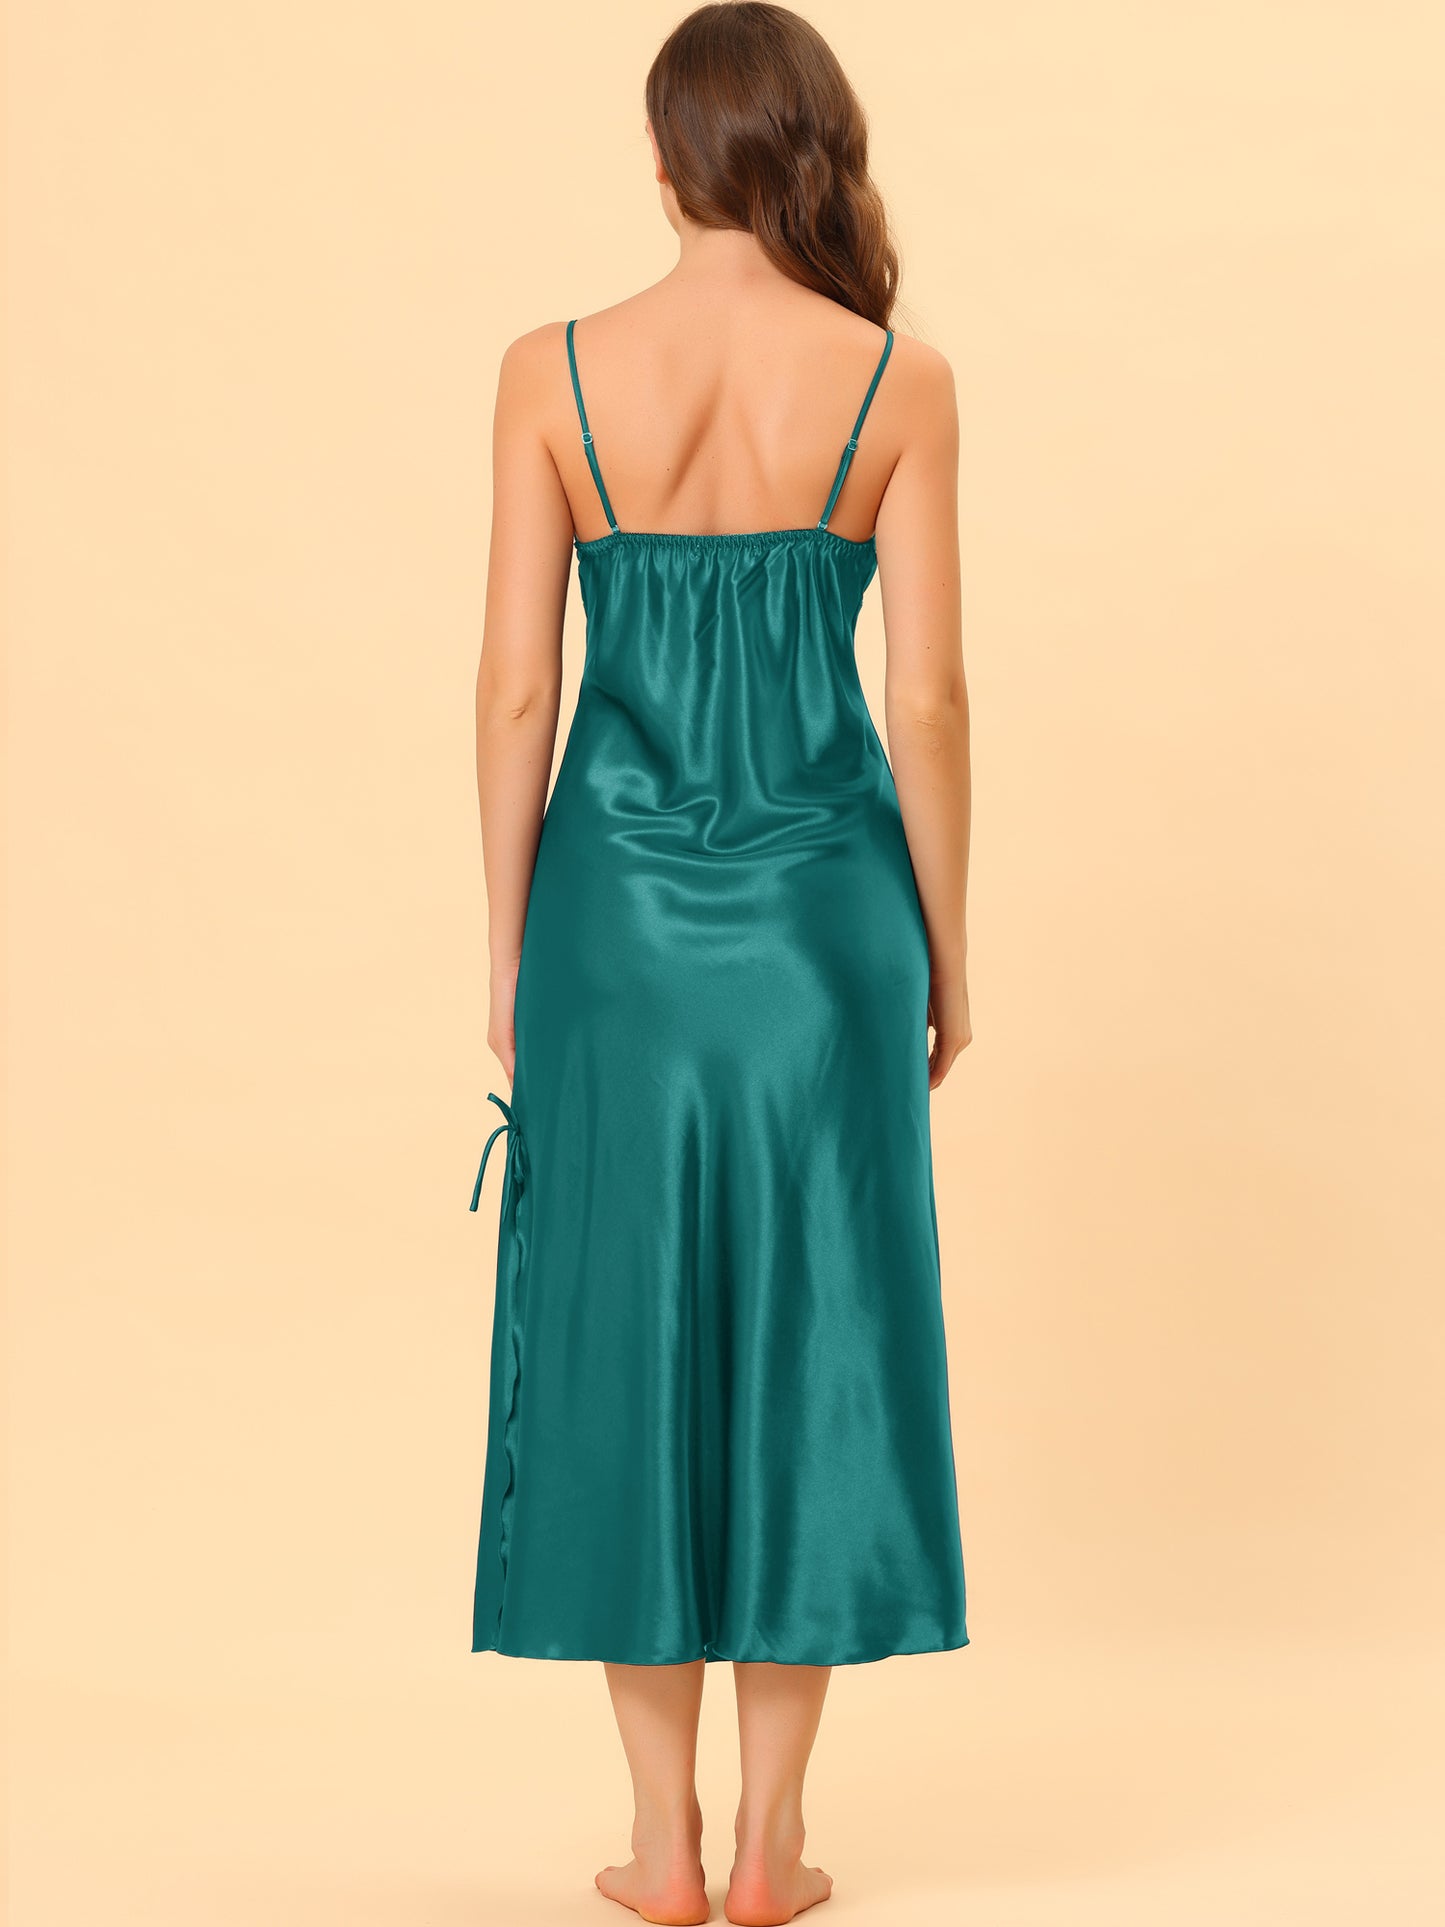 cheibear Satin Slip Dress Chemise Silky Lounge Camisole Maxi Nightgowns Peacock Green